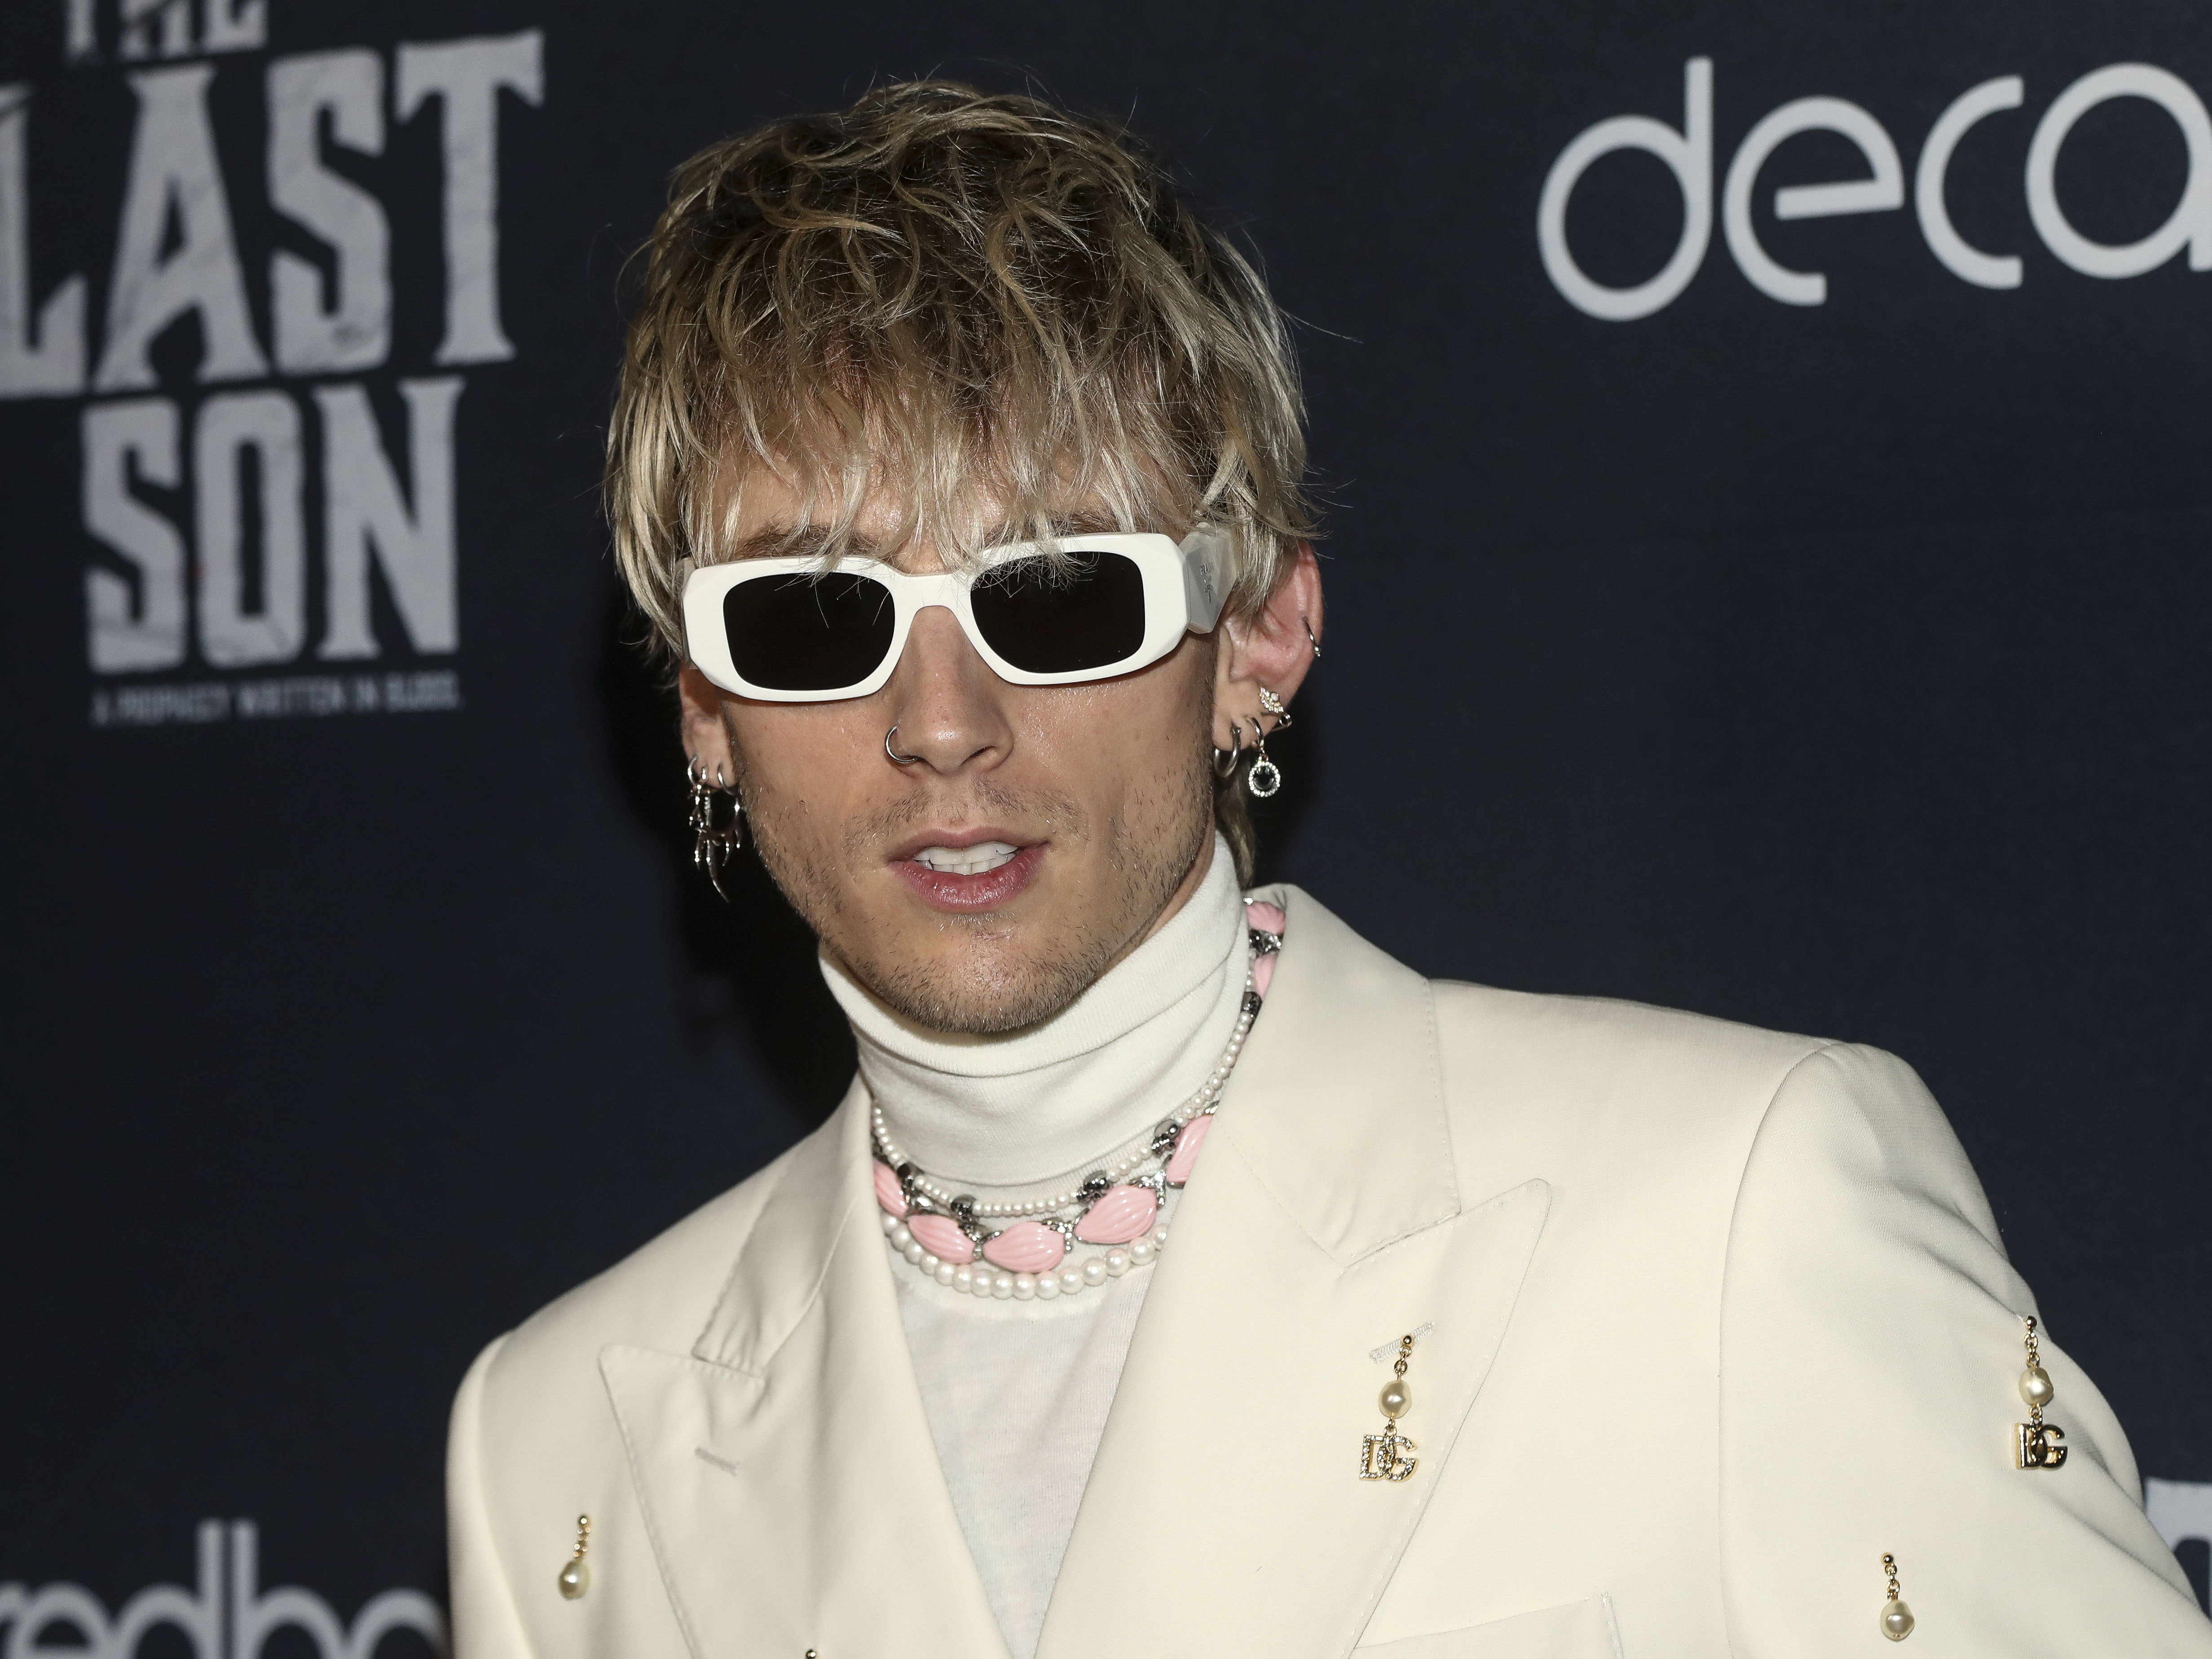 Machine Gun Kelly is a ‘Mainstream Sellout’ with new album